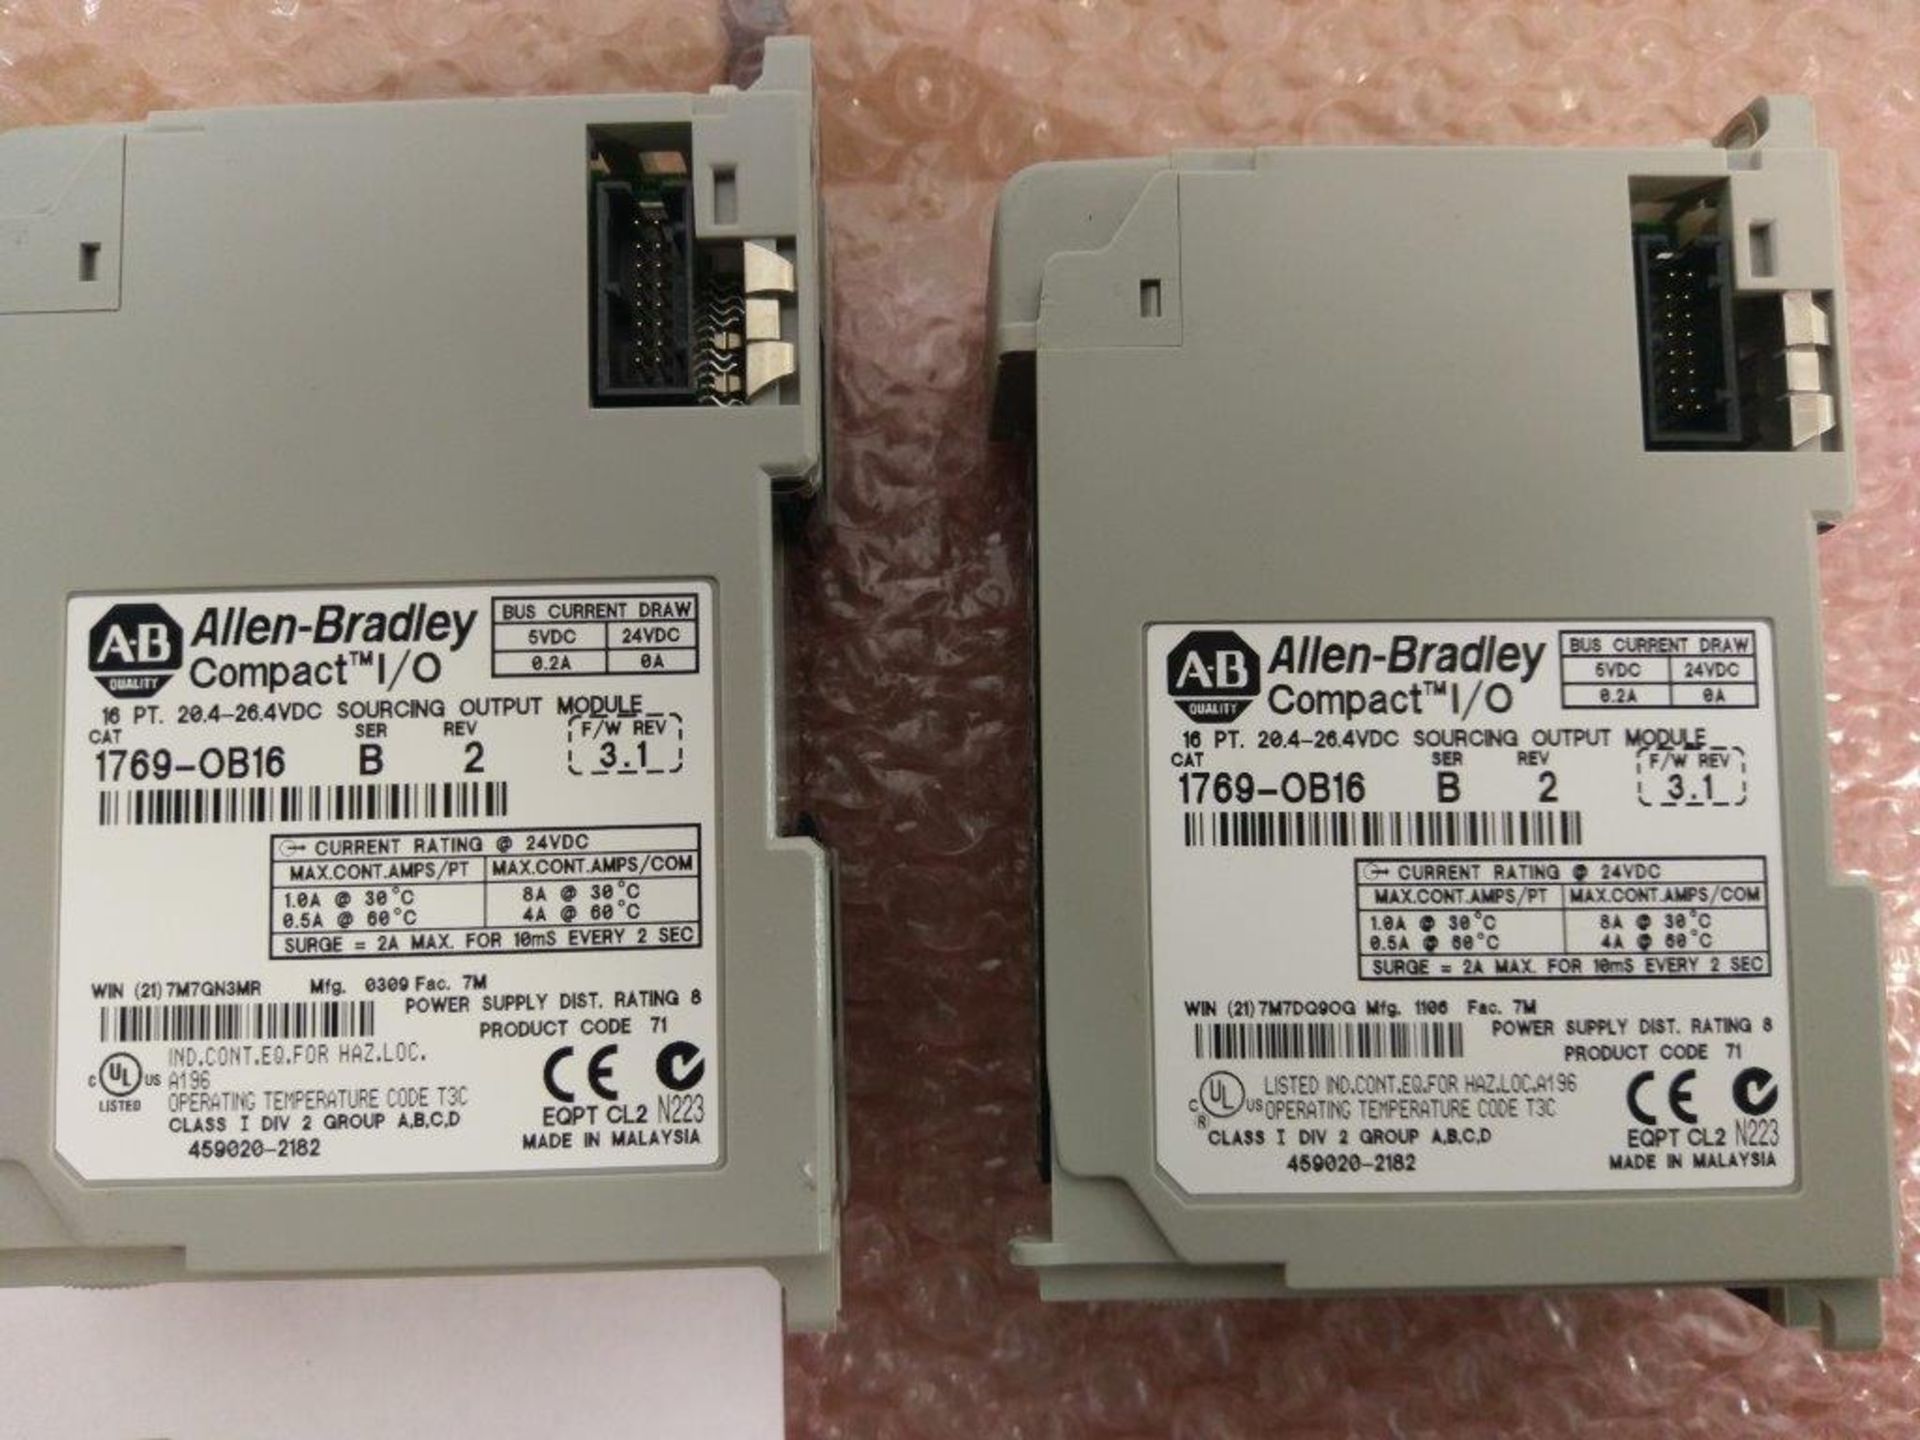 Lot of 2 Allen Bradley Compact I/O Output Modules Cat # 1769-OB16 - Image 3 of 3